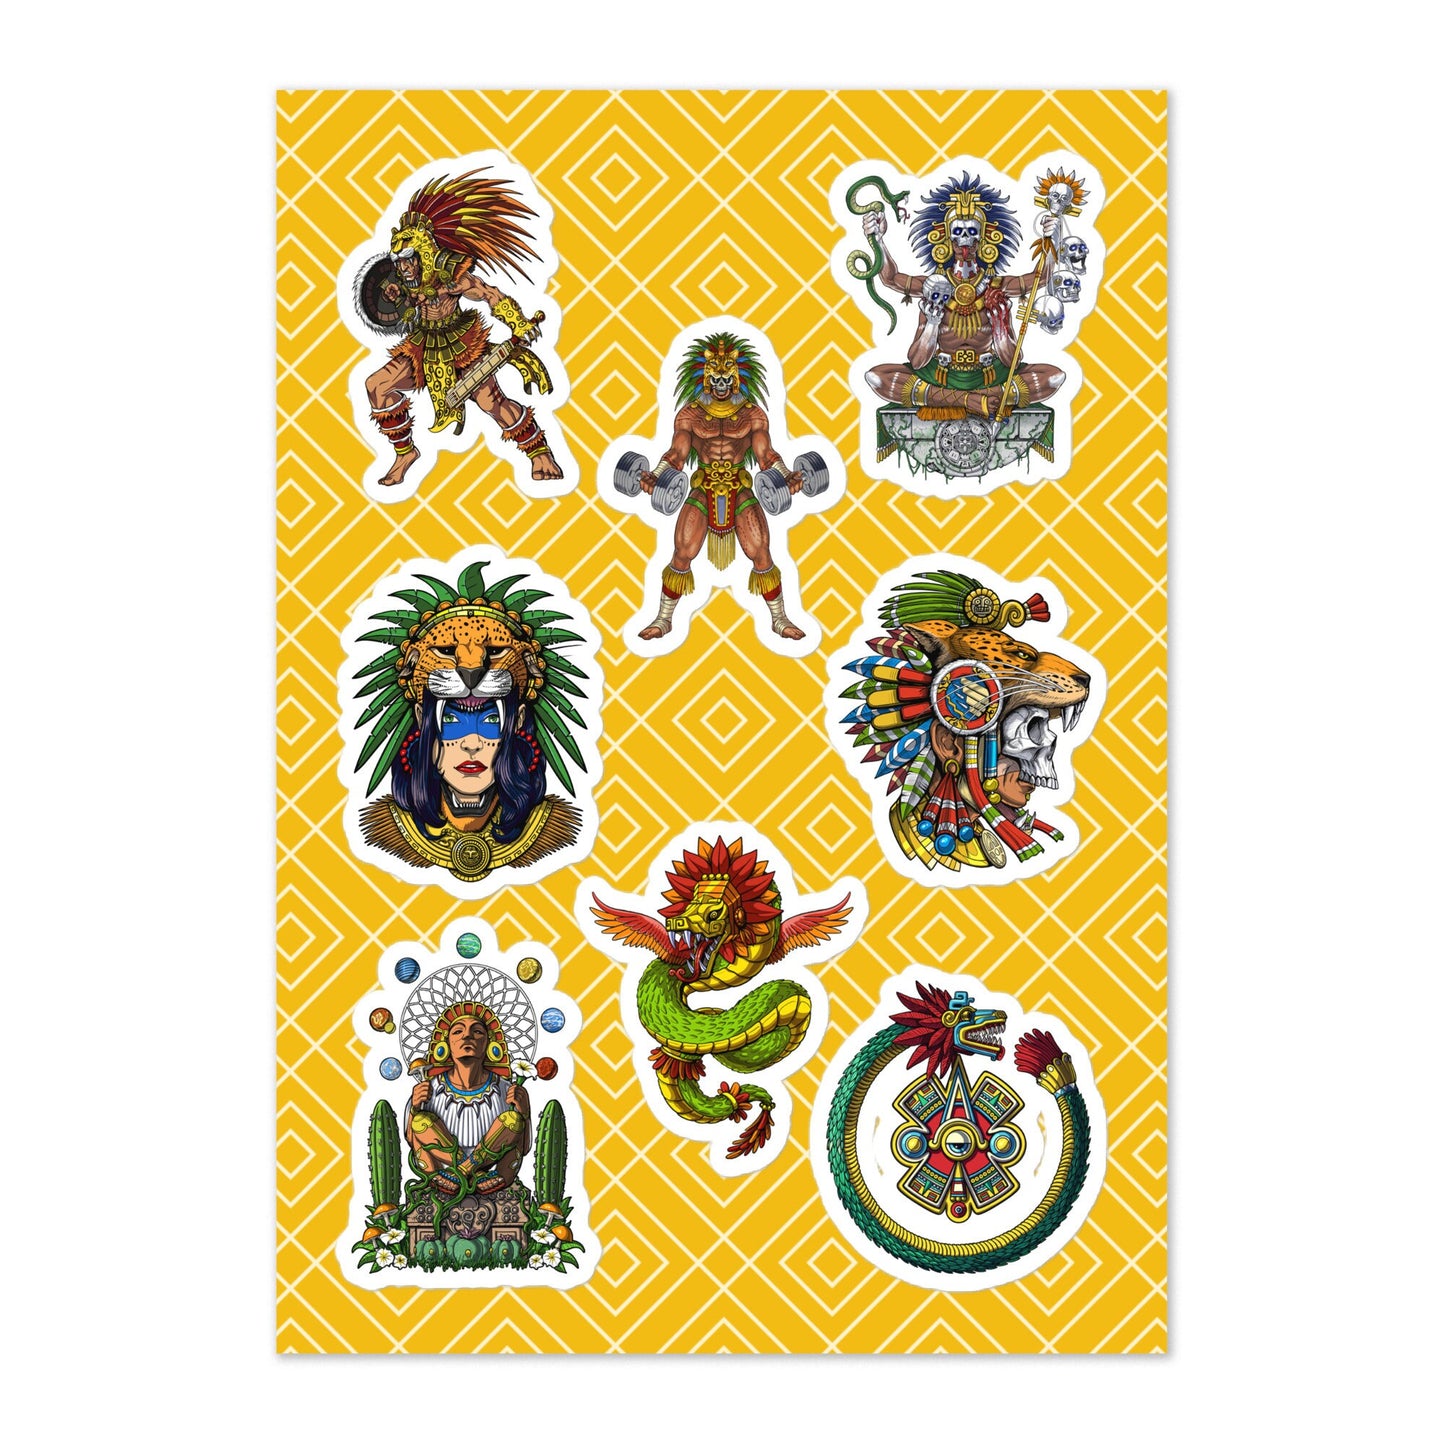 Aztec and Mayan mythology stickers - perfect for planners and decorating